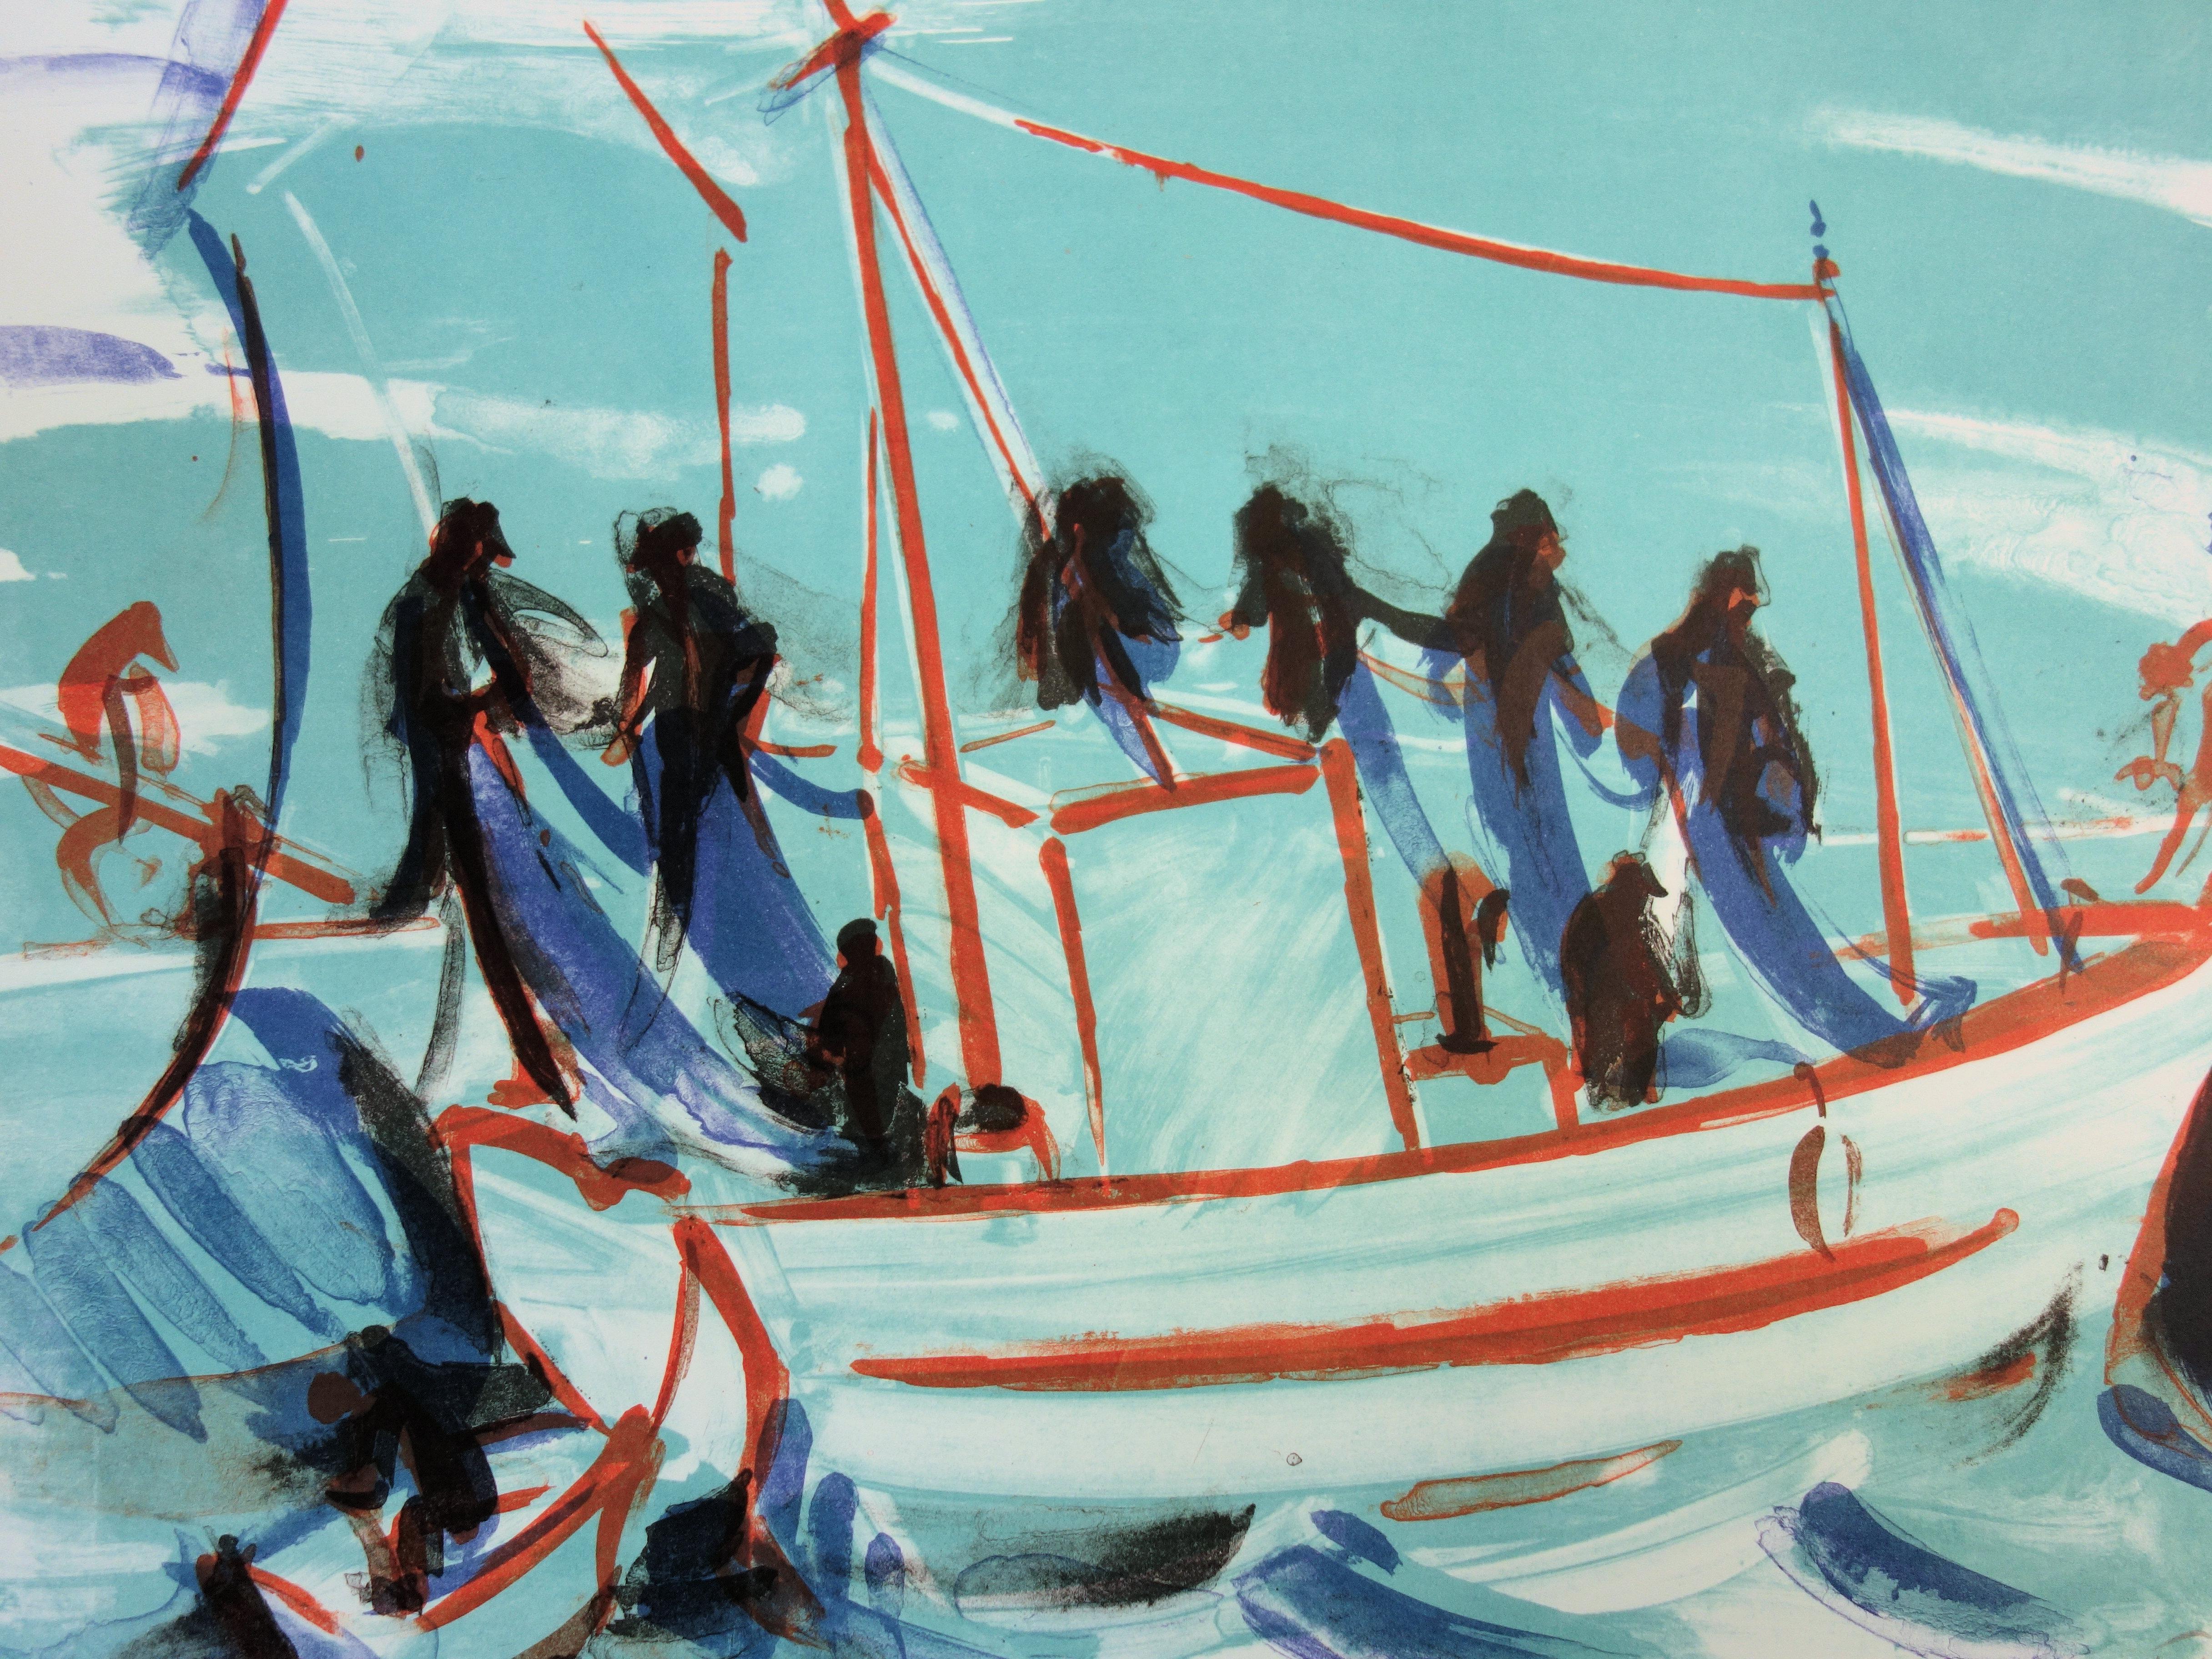 Fishermen working on a Boat - Original handsigned lithograph - 50 copies - Modern Print by Jean Helion